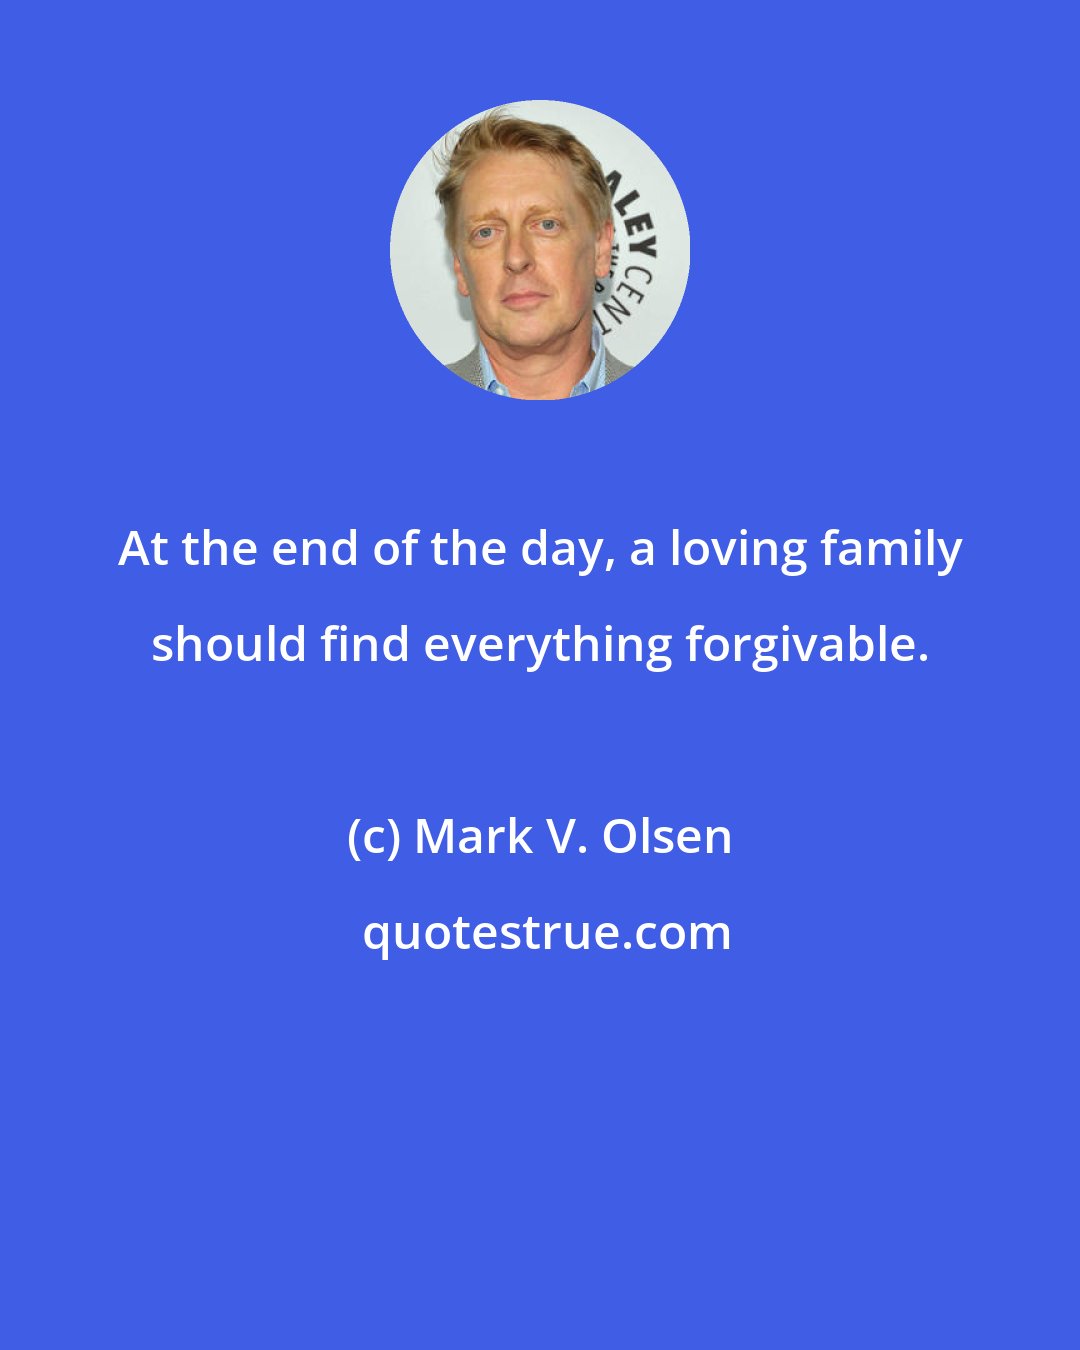 Mark V. Olsen: At the end of the day, a loving family should find everything forgivable.